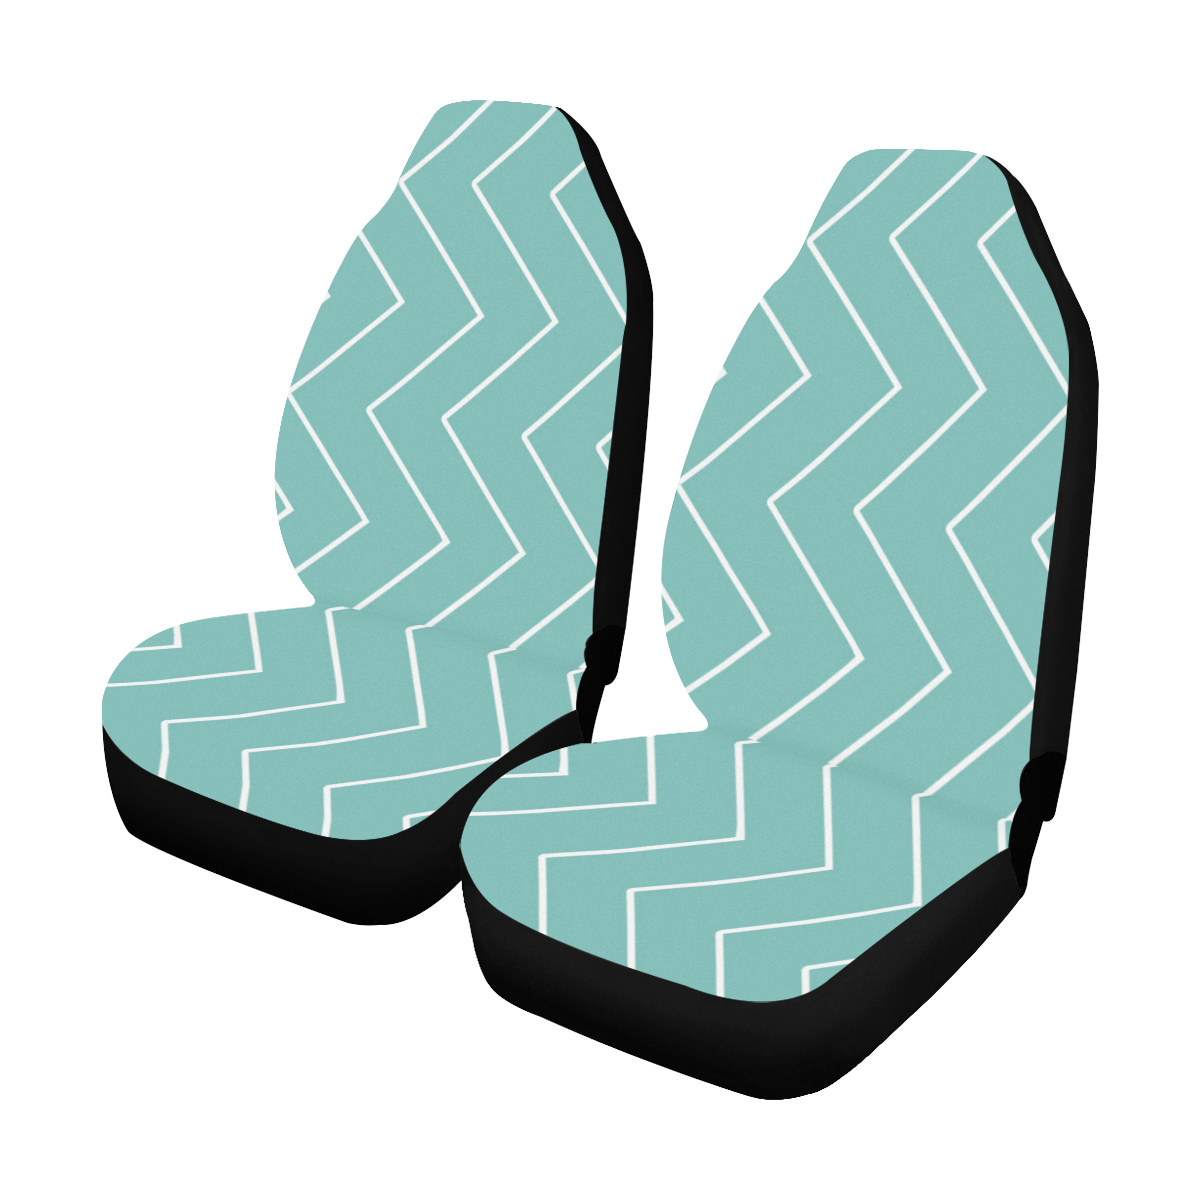 Abstract geometric pattern - blue and white. Car Seat Covers (Set of 2)